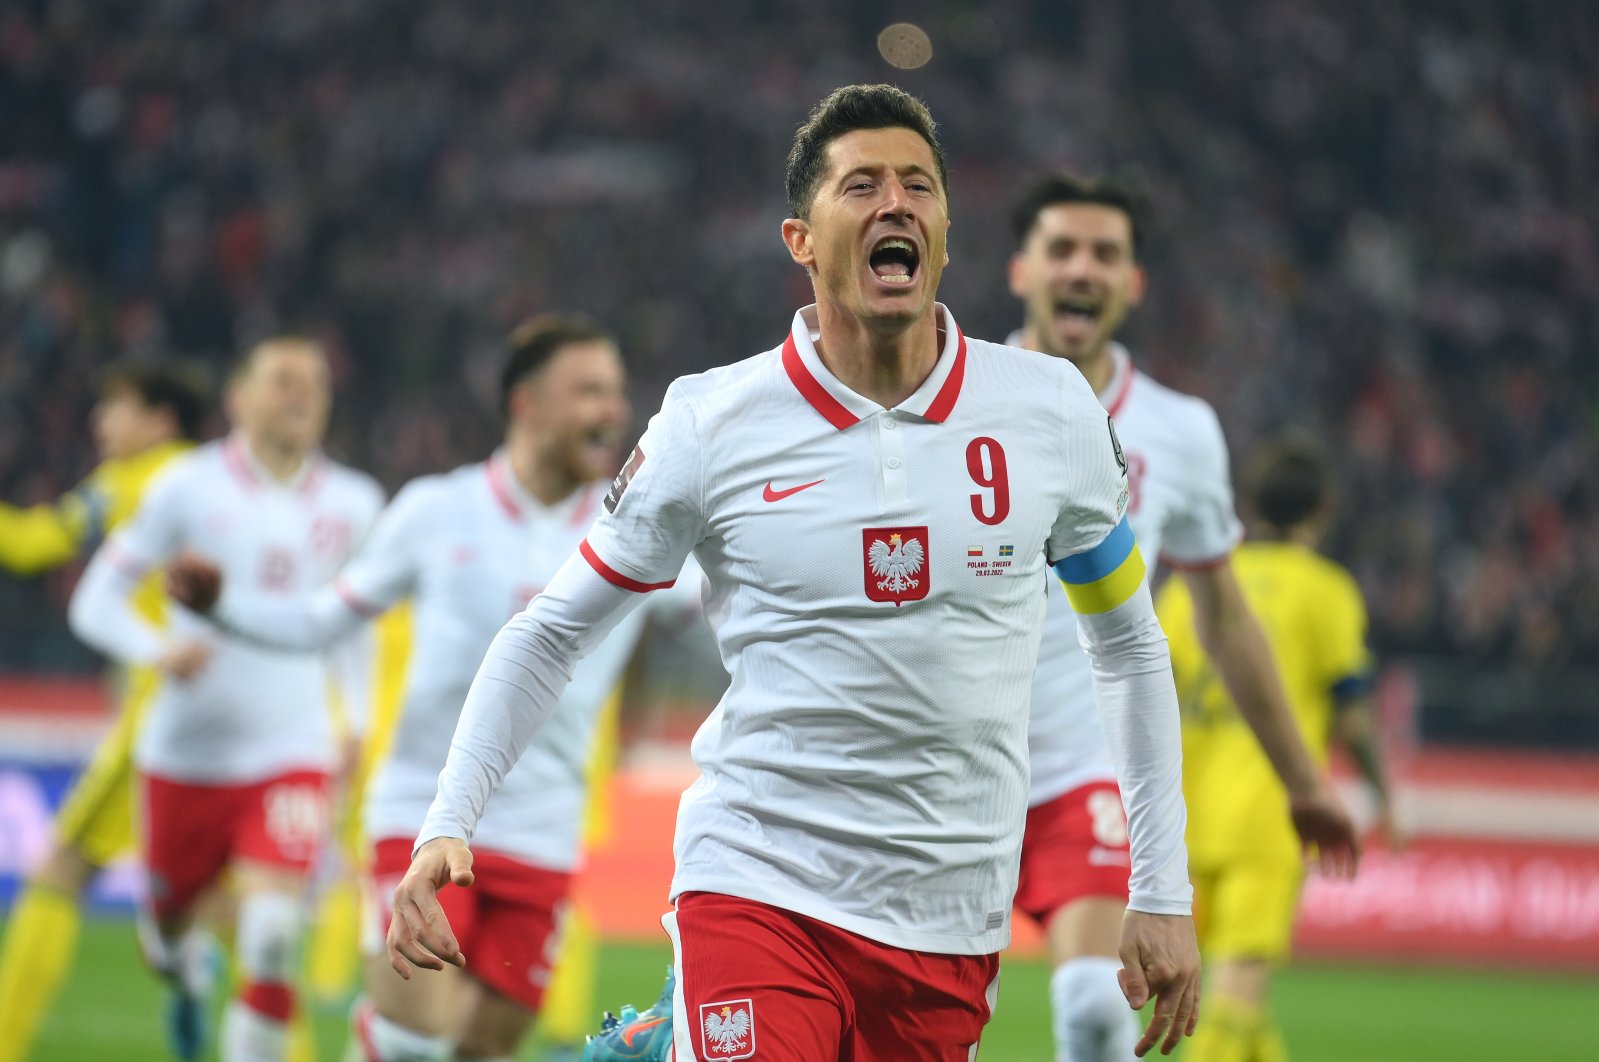 Poland&#039;s Robert Lewandowski celebrates after scoring during the 2022 FIFA World Cup qualifier knockout round playoff match between Poland and Sweden, Chorzow, Poland, March 29, 2022. (Getty Images Photo)